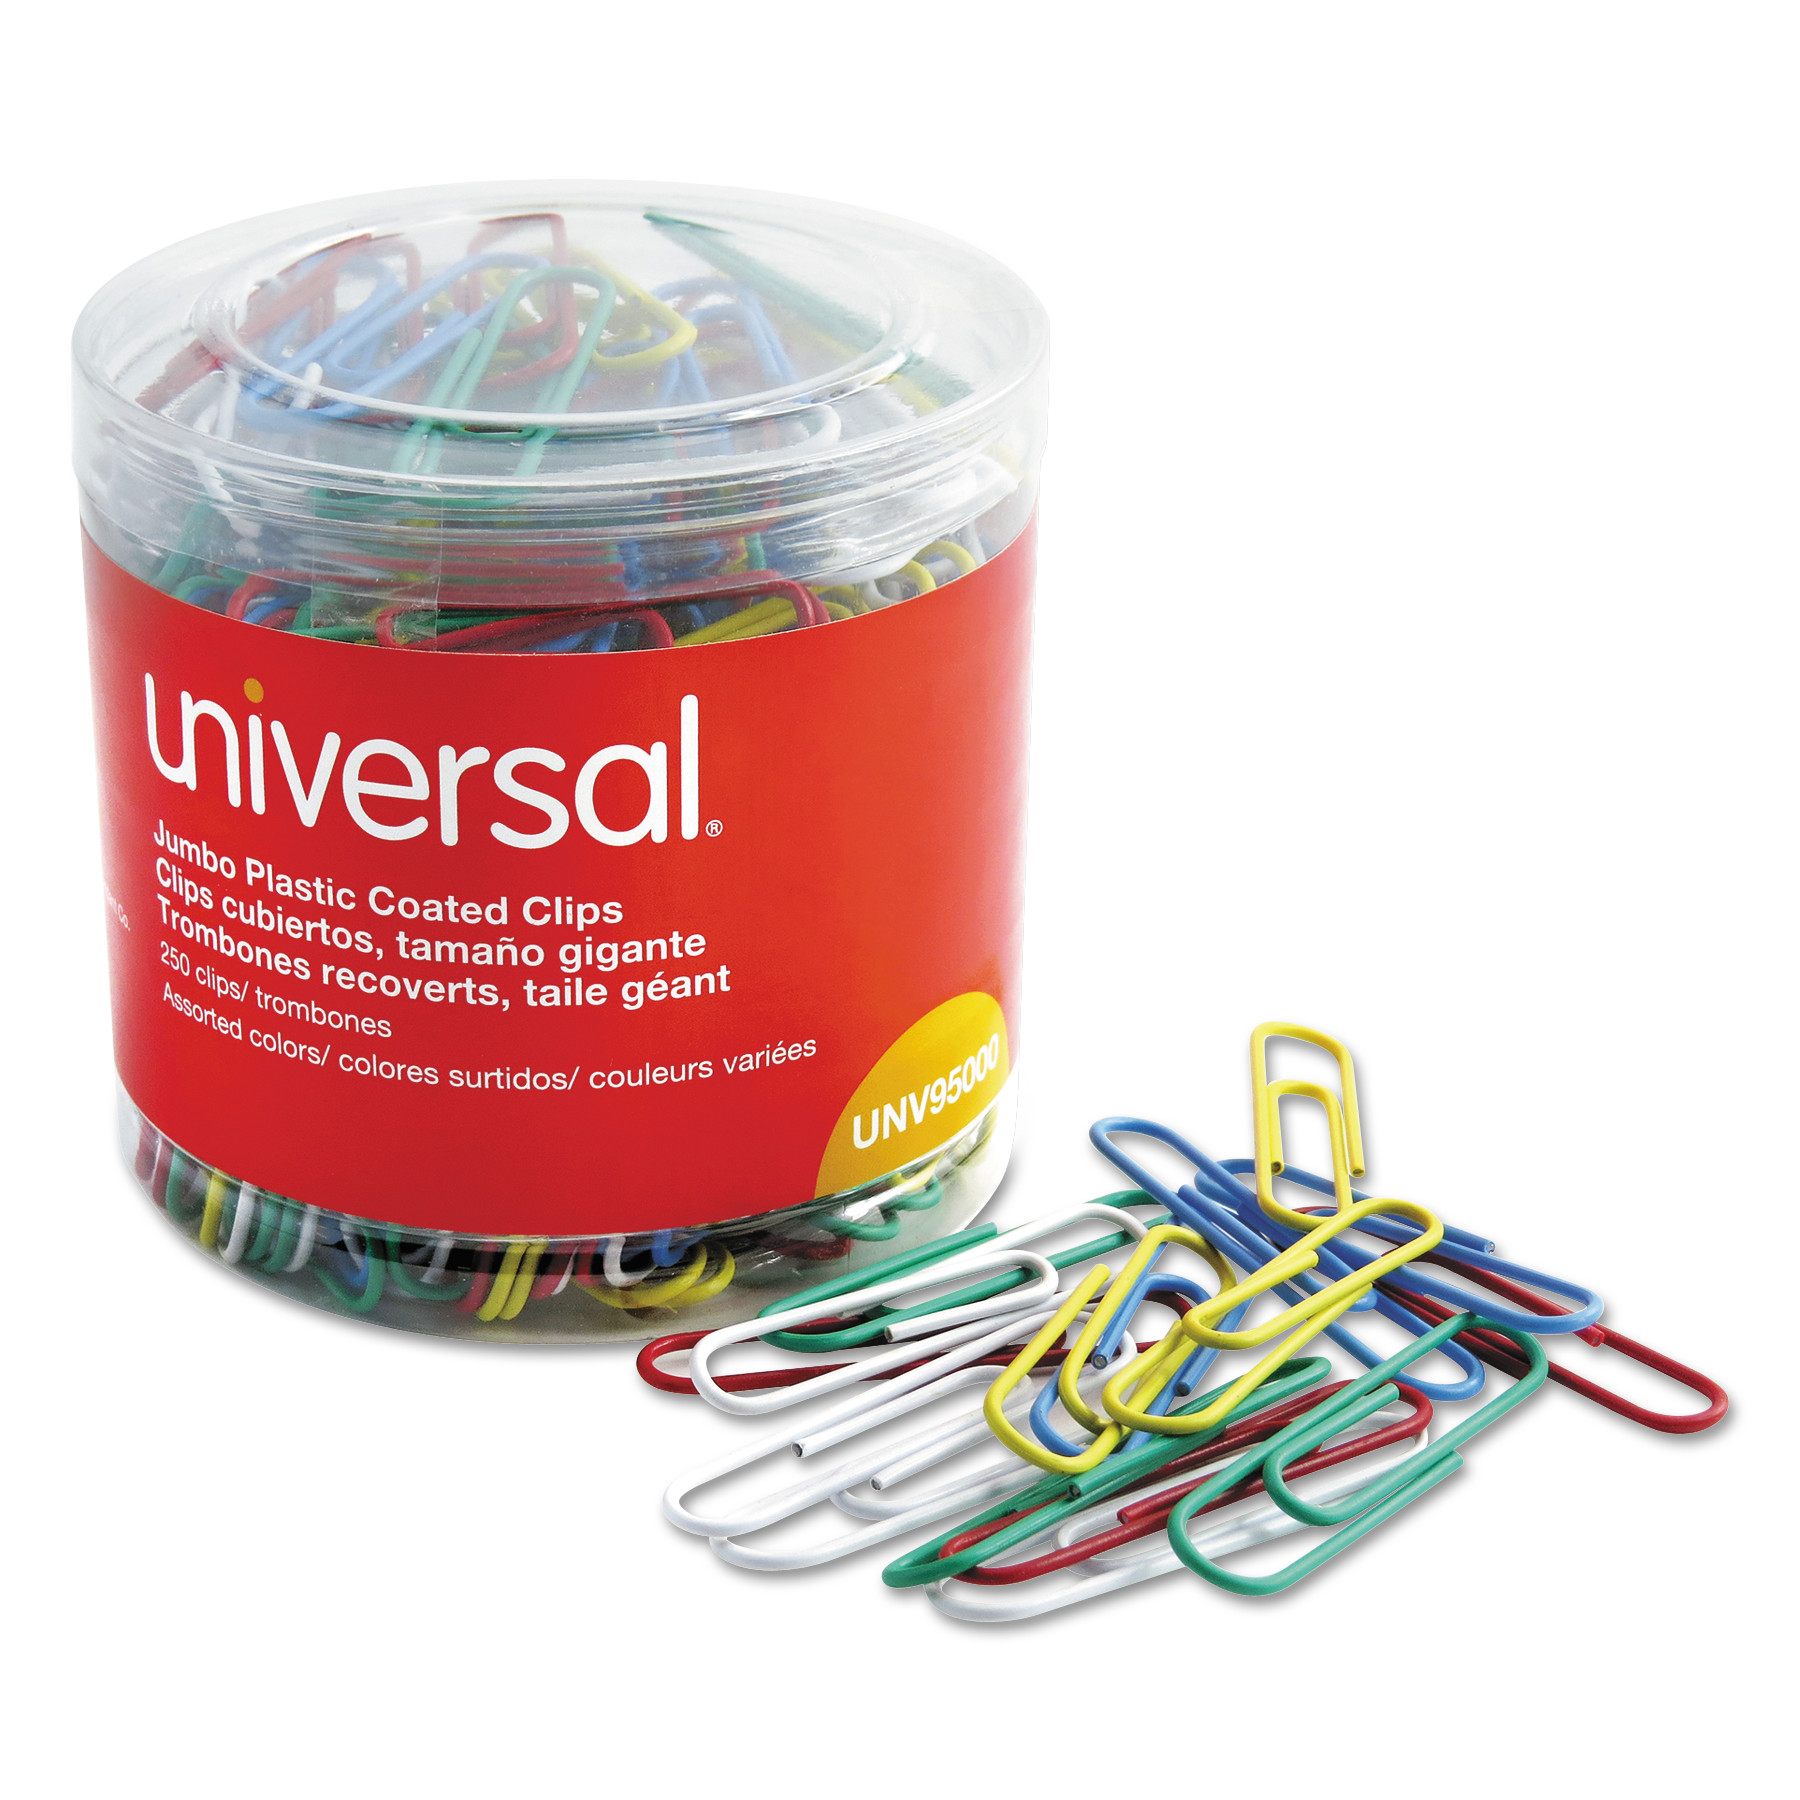  Universal UNV95000 Plastic-Coated Paper Clips, Jumbo, Assorted Colors, 250/Pack (UNV95000) 